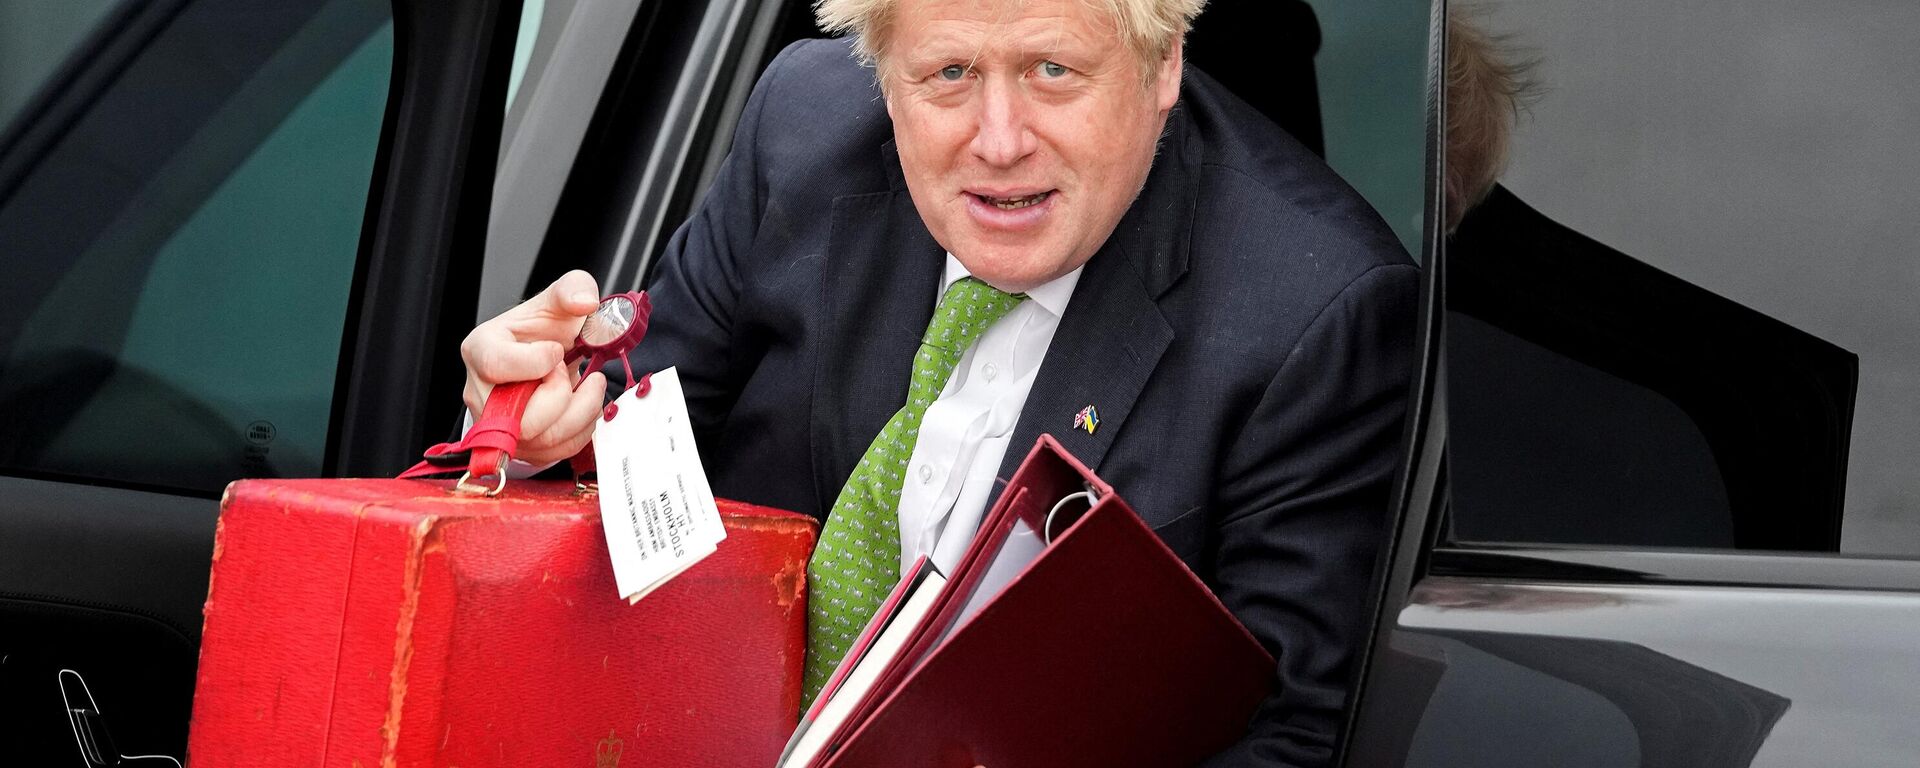 Britain's Prime Minister Boris Johnson caries his ministerial red box as he exits a car to board a flight from London Stansted airport, on May 11, 2022 - Sputnik International, 1920, 15.05.2022